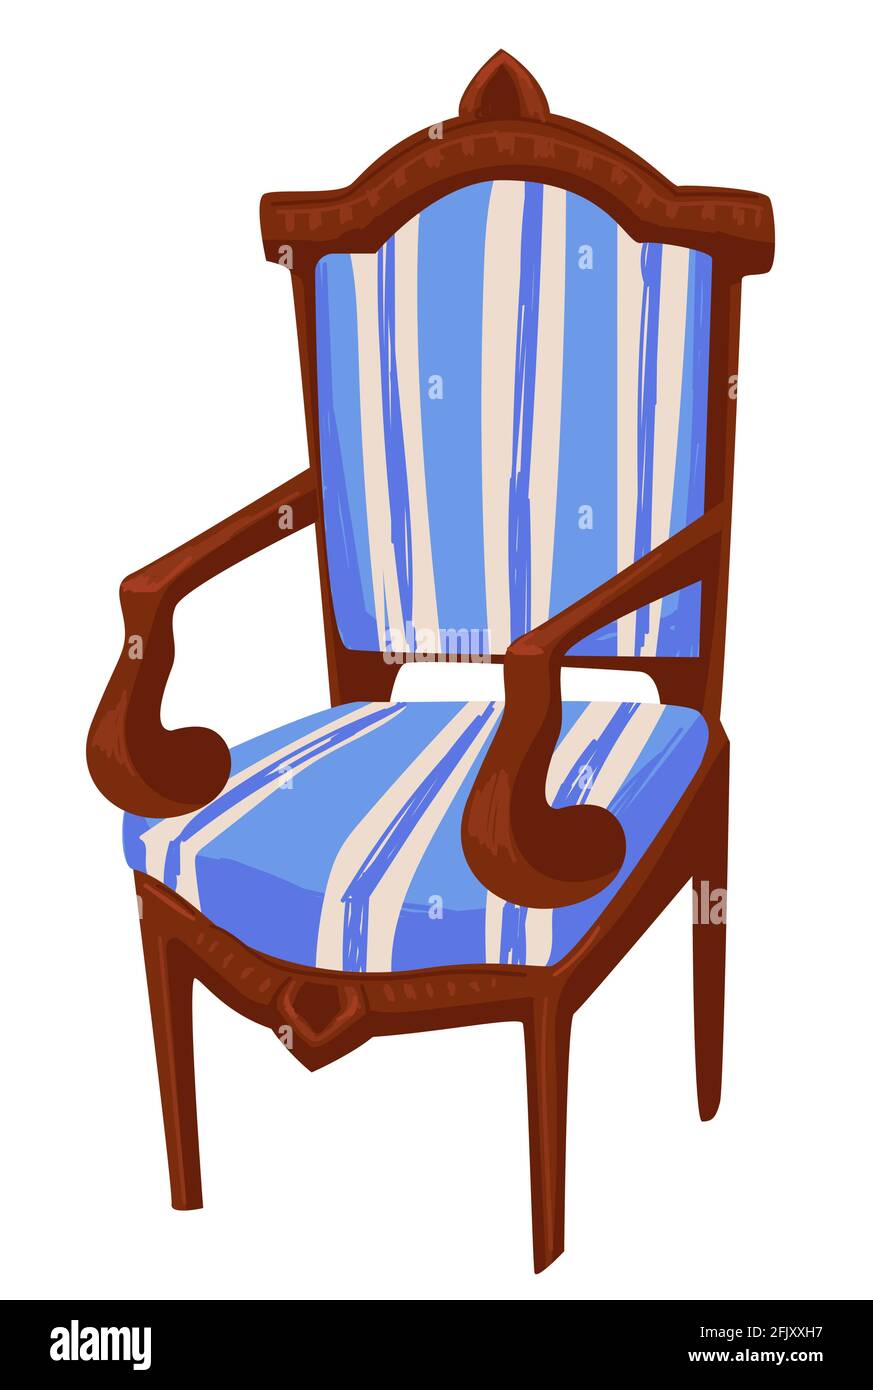 Vintage furniture, chair with carvings and decor Stock Vector